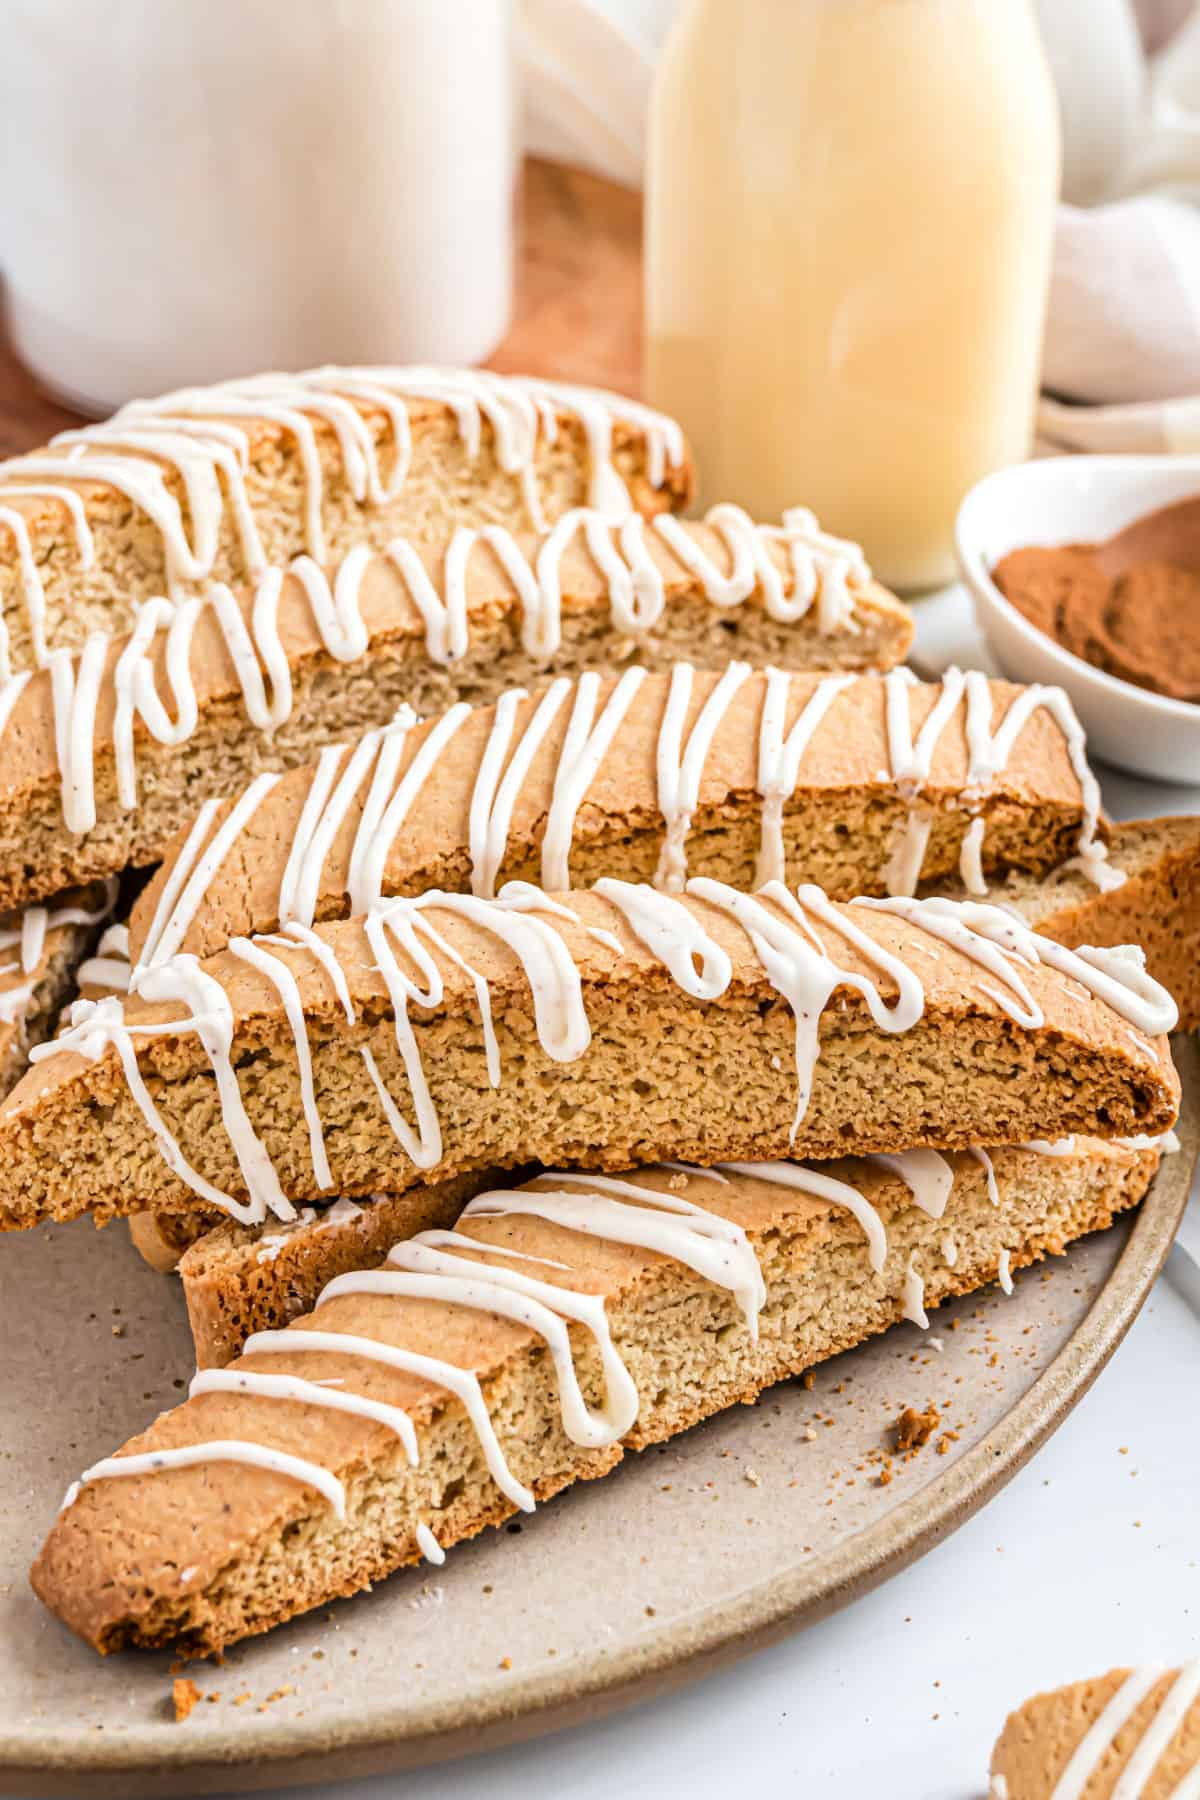 Eggnog flavored biscotti stacked on a plate to serve.